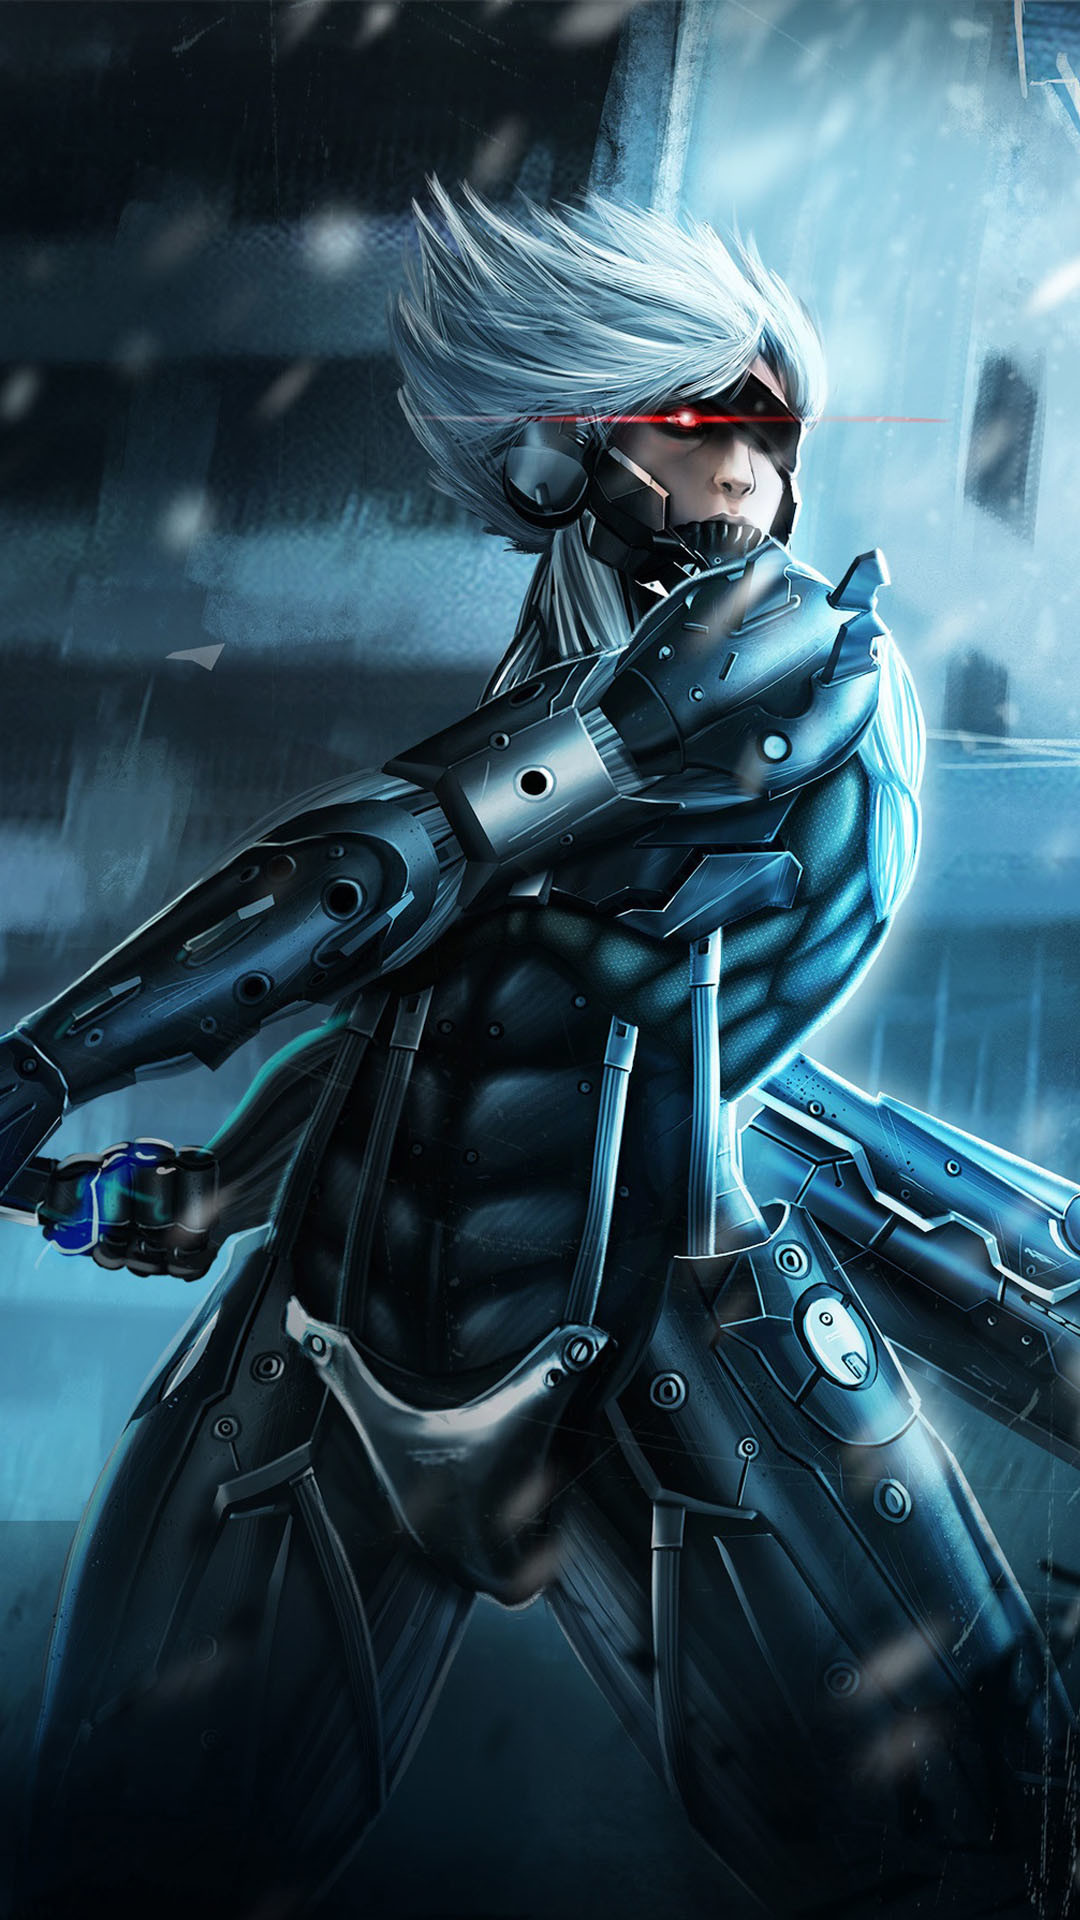 1080x1920 Metal Gear Rising Raiden iPhone 6 / 6 Plus and iPhone 5/4 Wallpapers